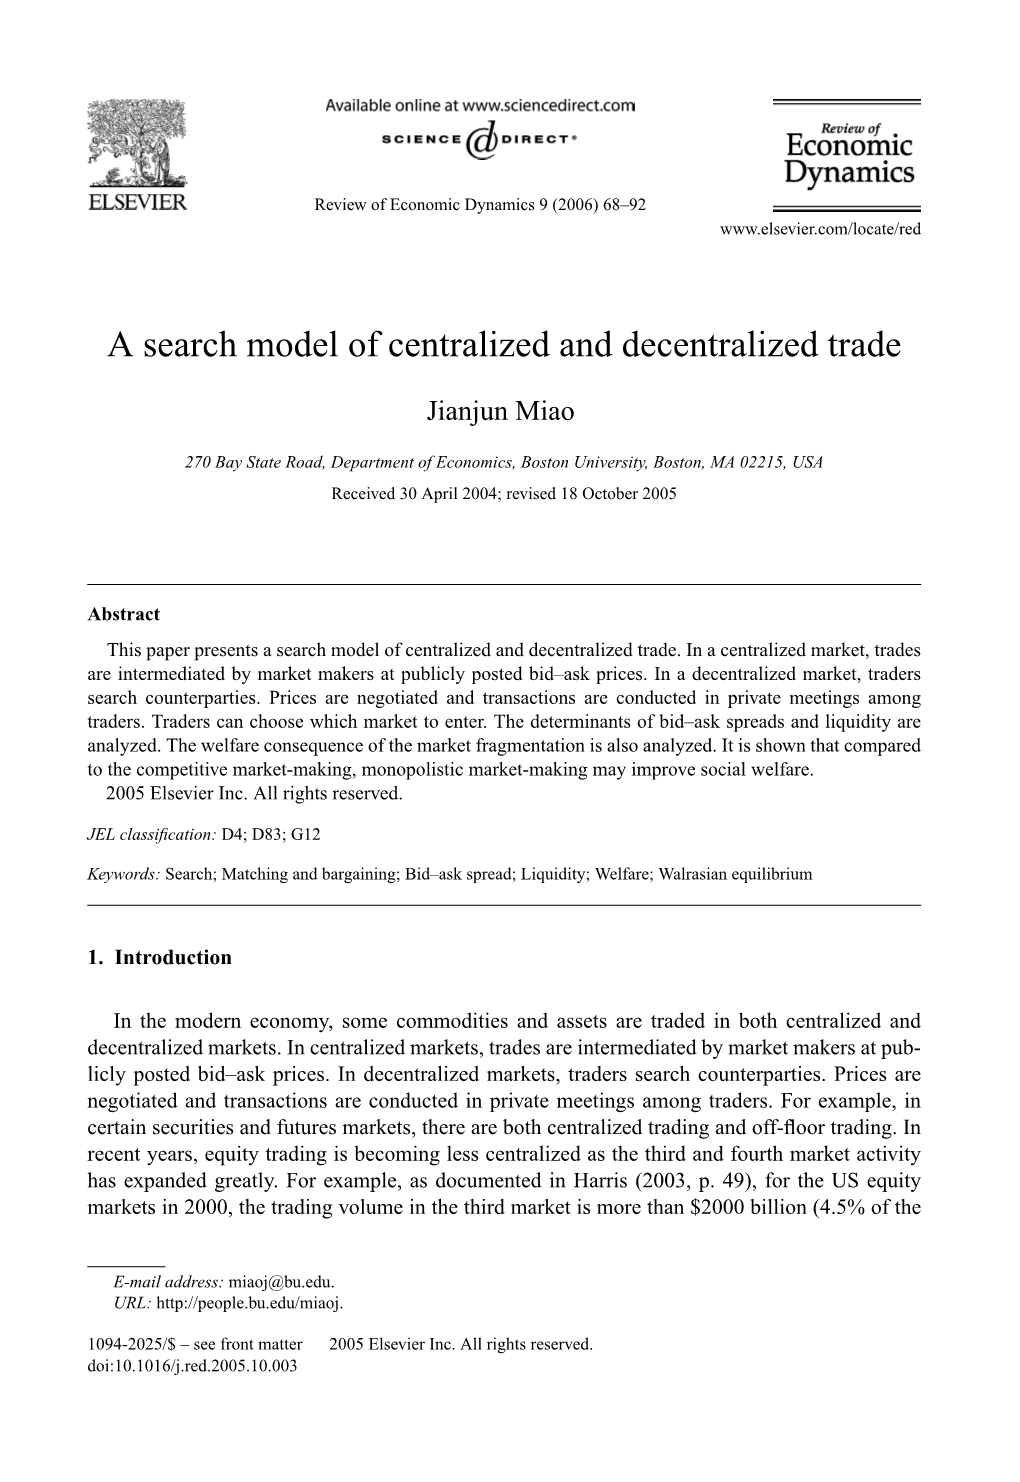 A Search Model of Centralized and Decentralized Trade